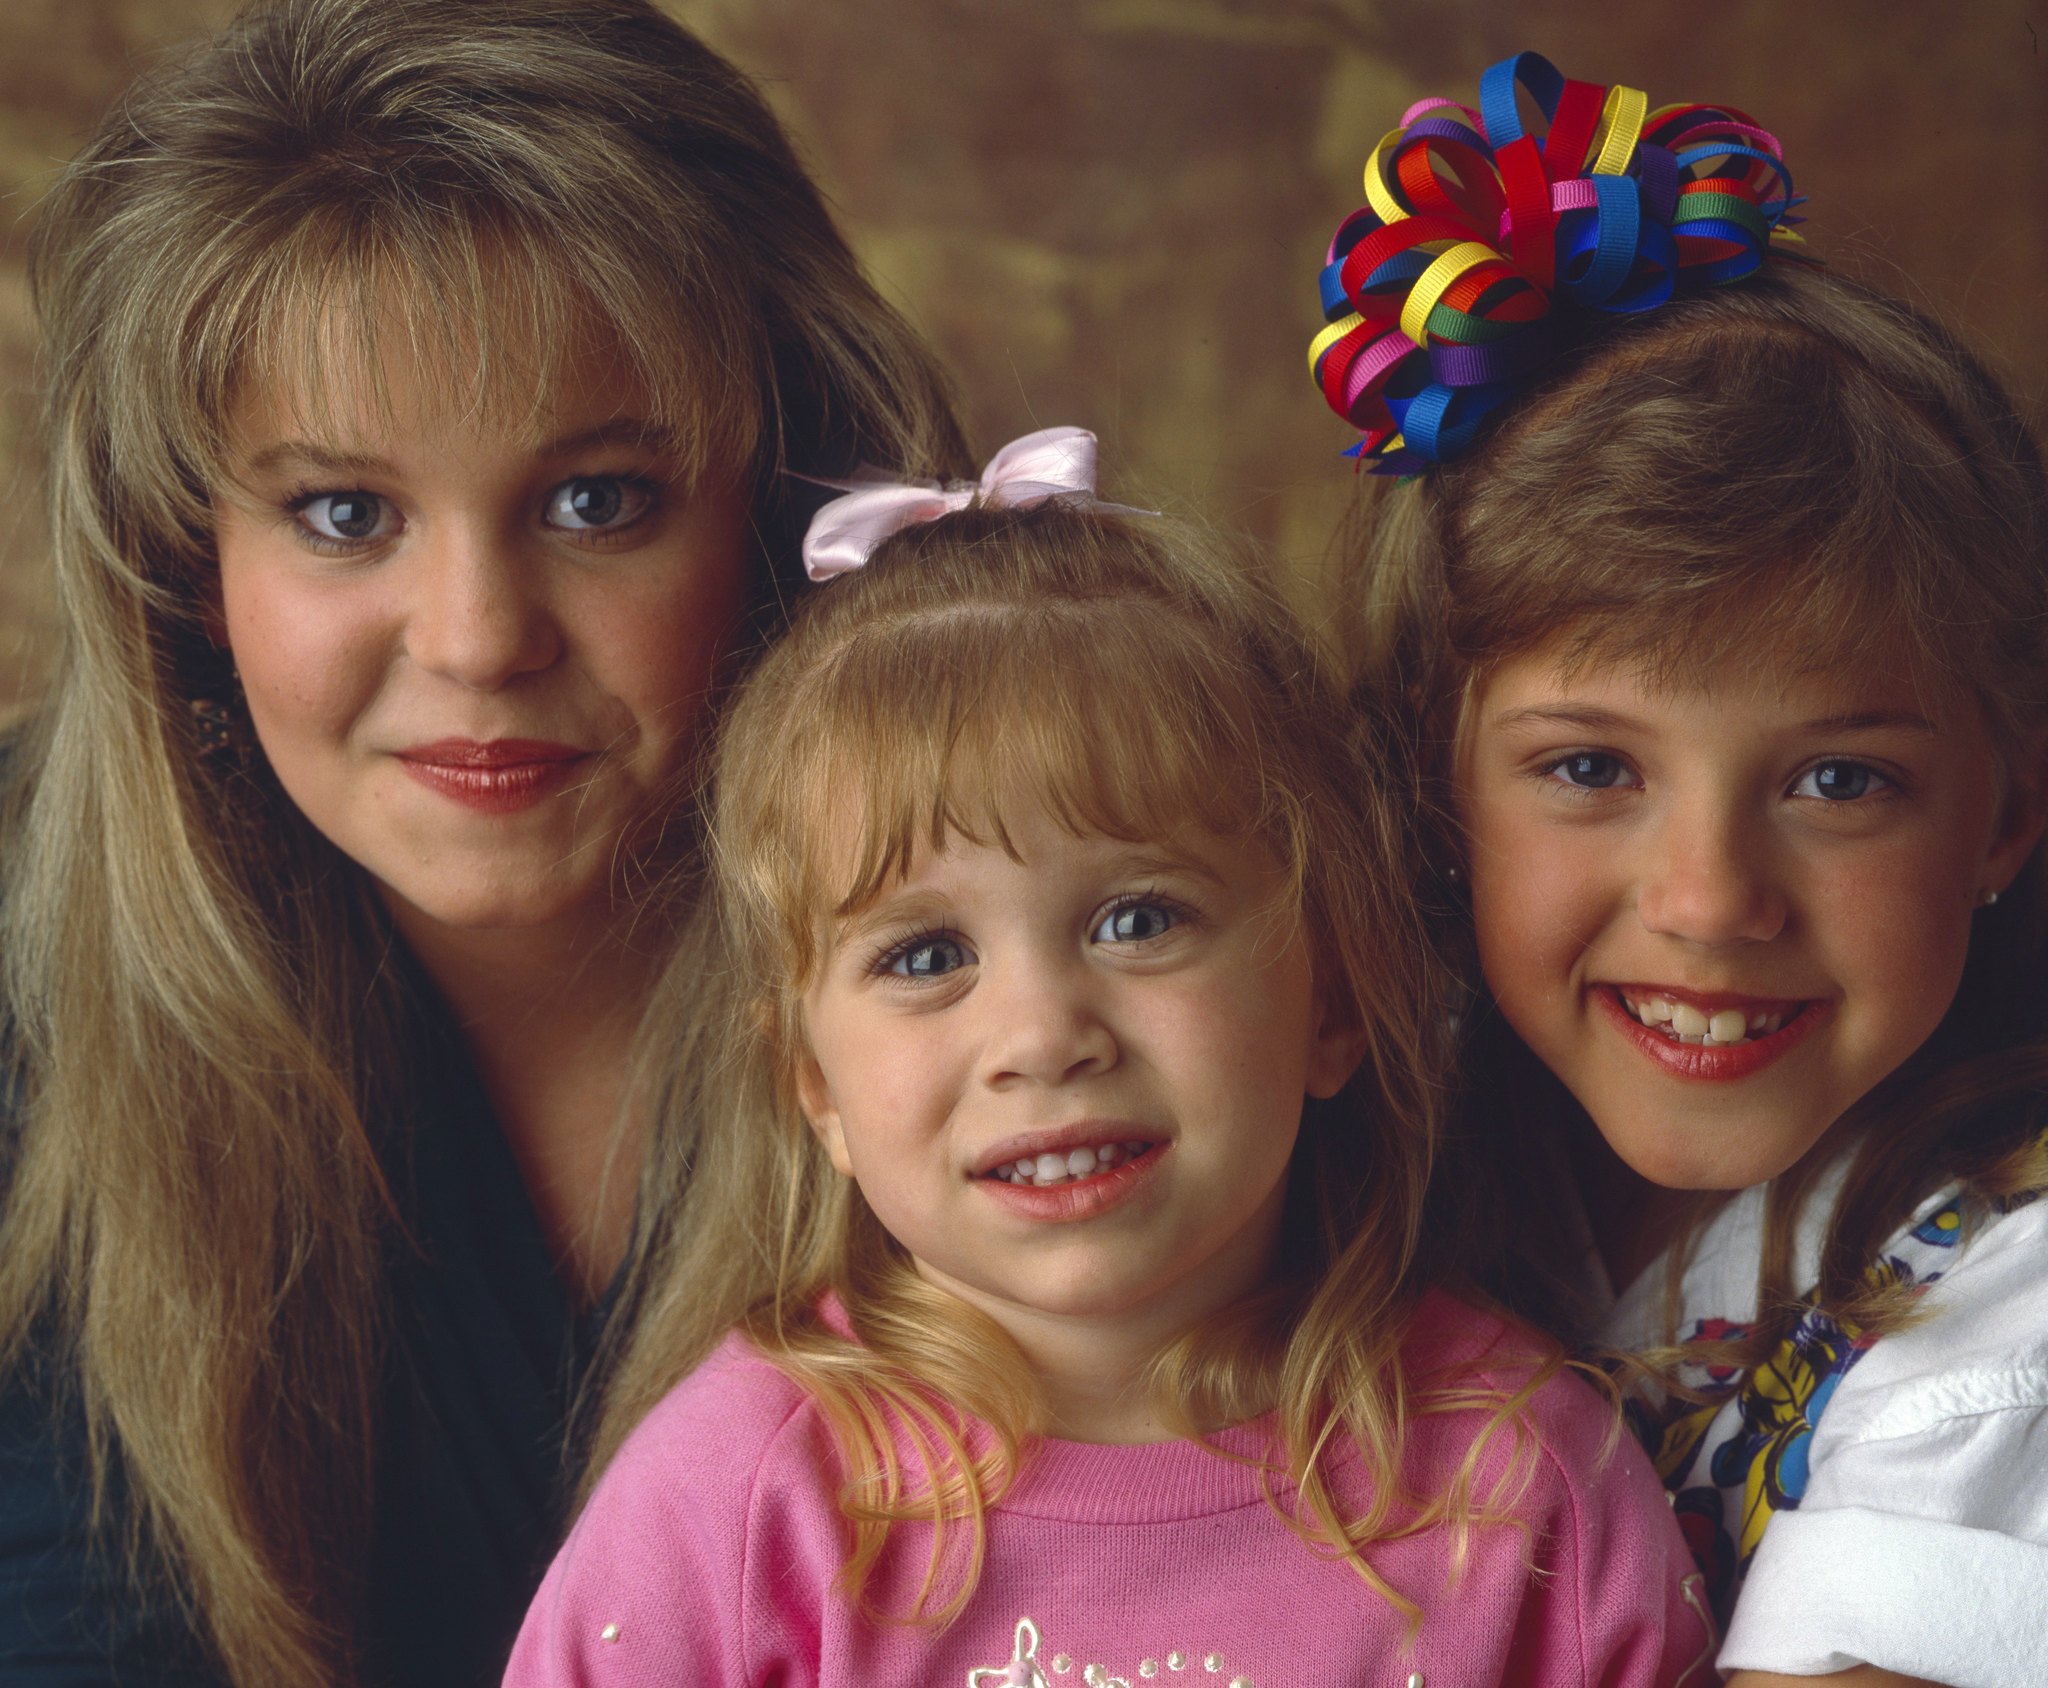 Still of Ashley Olsen, Candace Cameron Bure and Jodie Sweetin in Full House (1987)